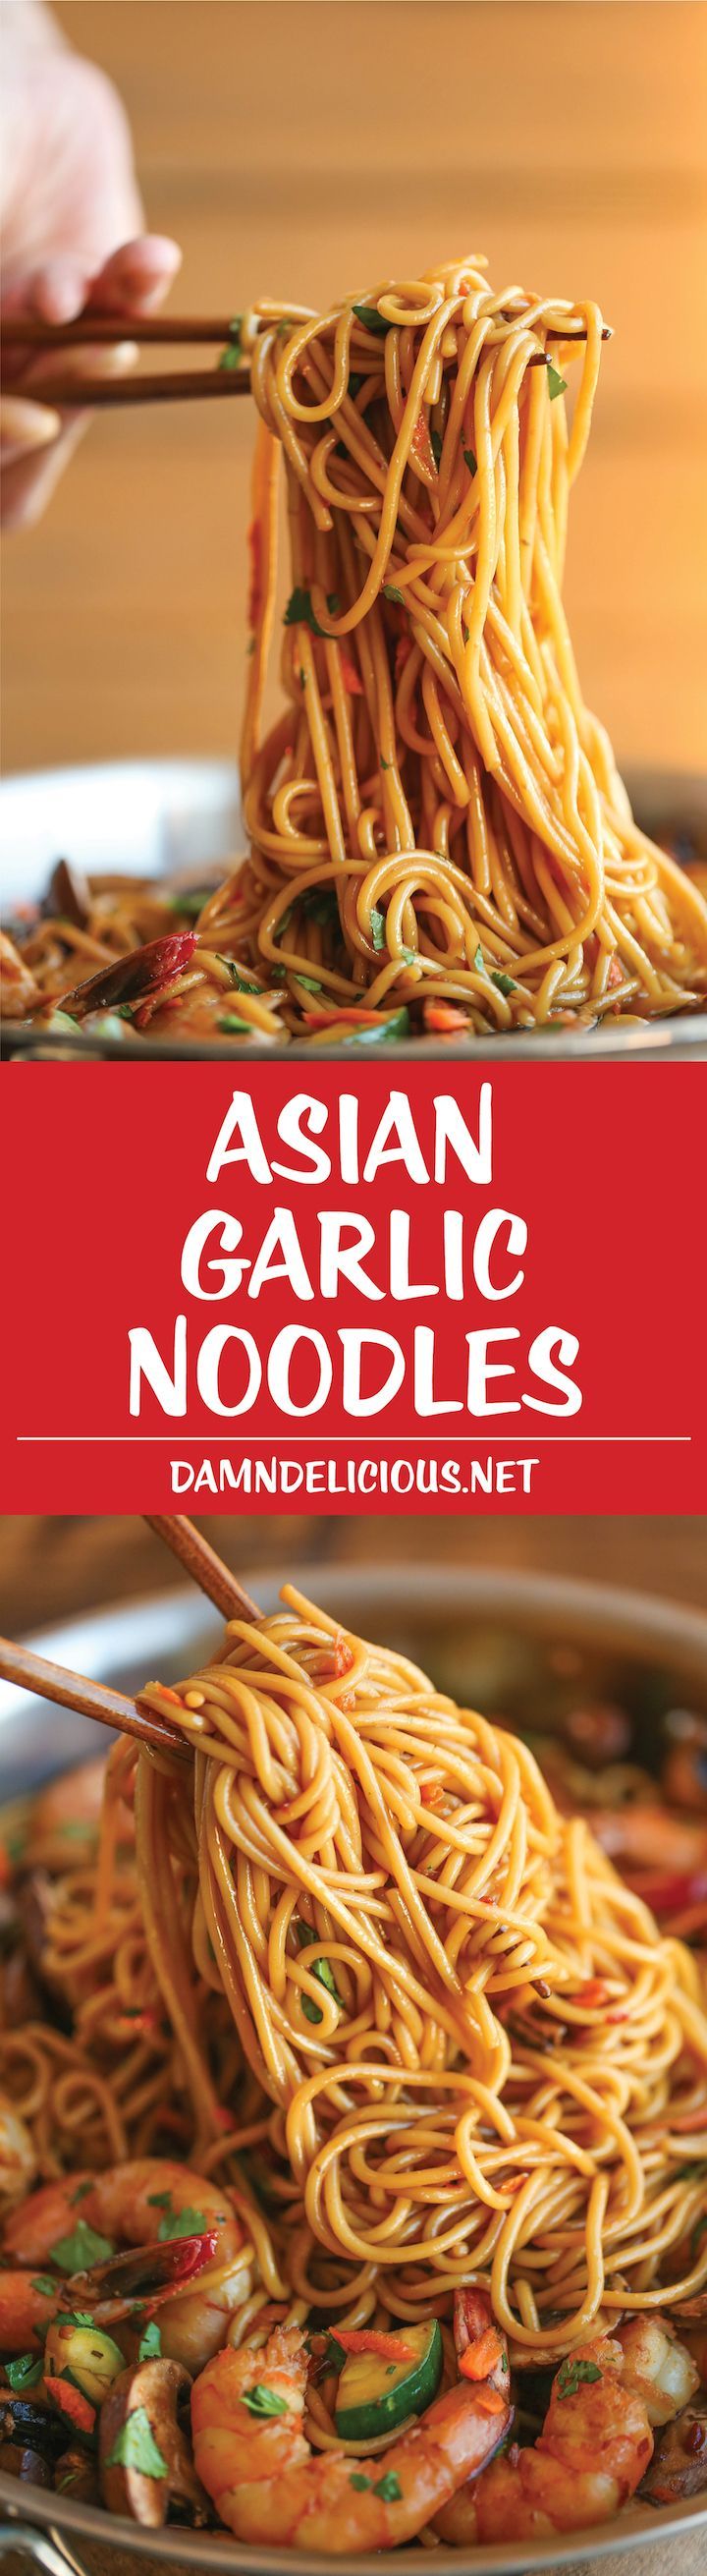 Asian Garlic Noodles – Easy peasy Asian noodle stir-fry using pantry ingredients that you already have on